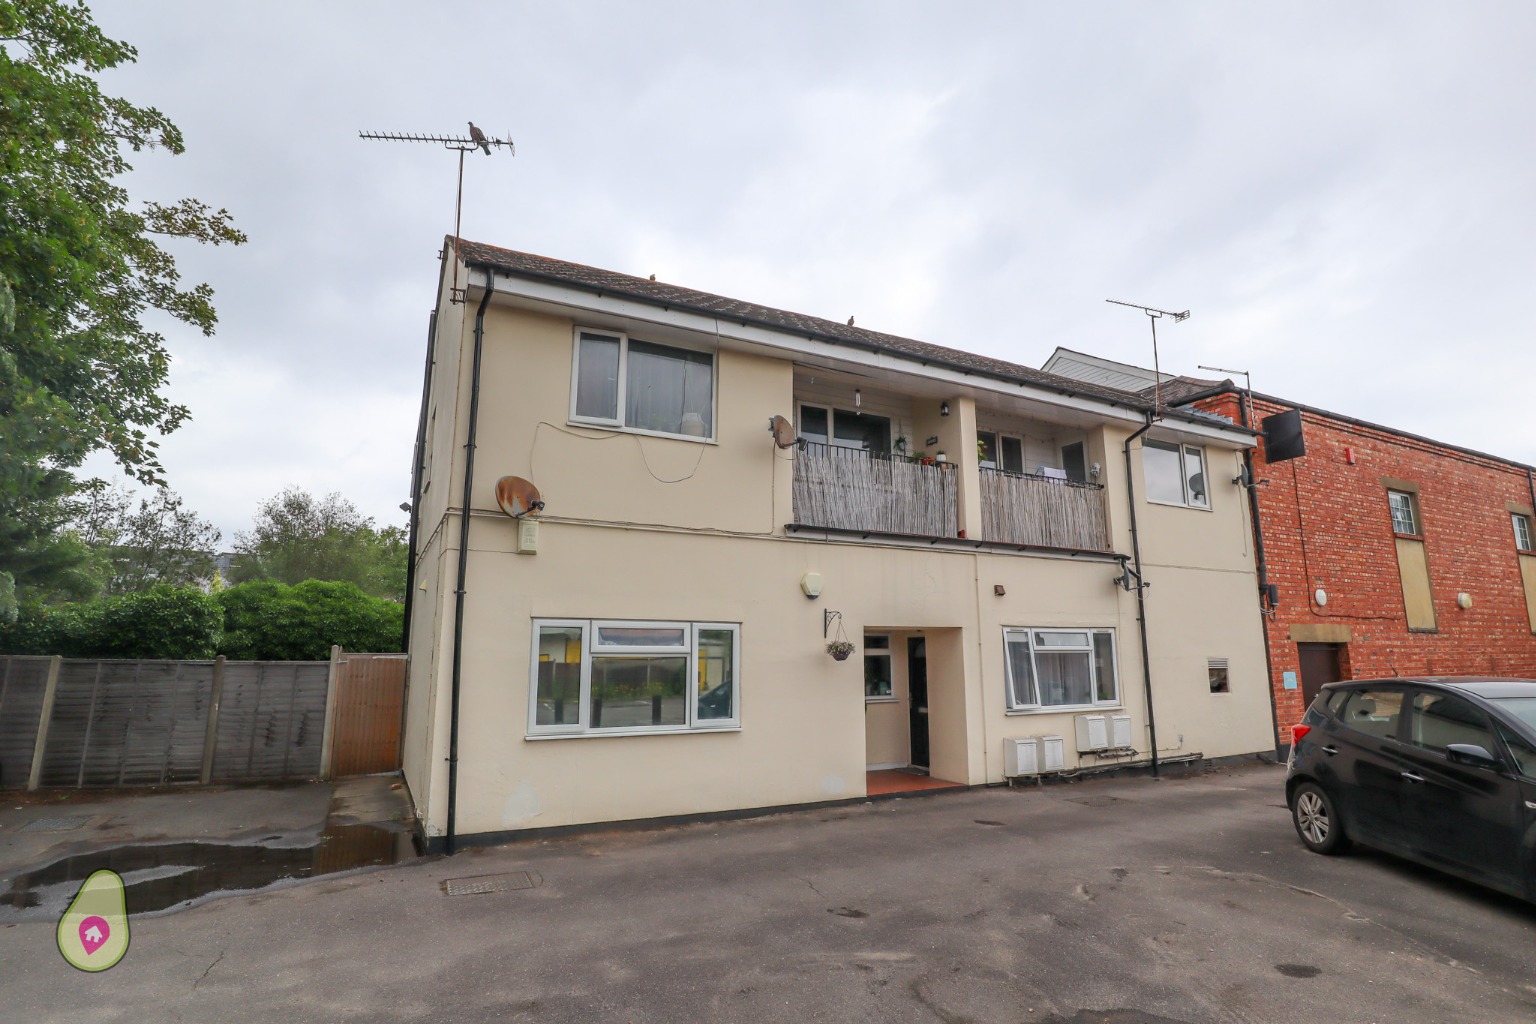 2 bed ground floor maisonette for sale in Camp Road, Farnborough - Property Image 1